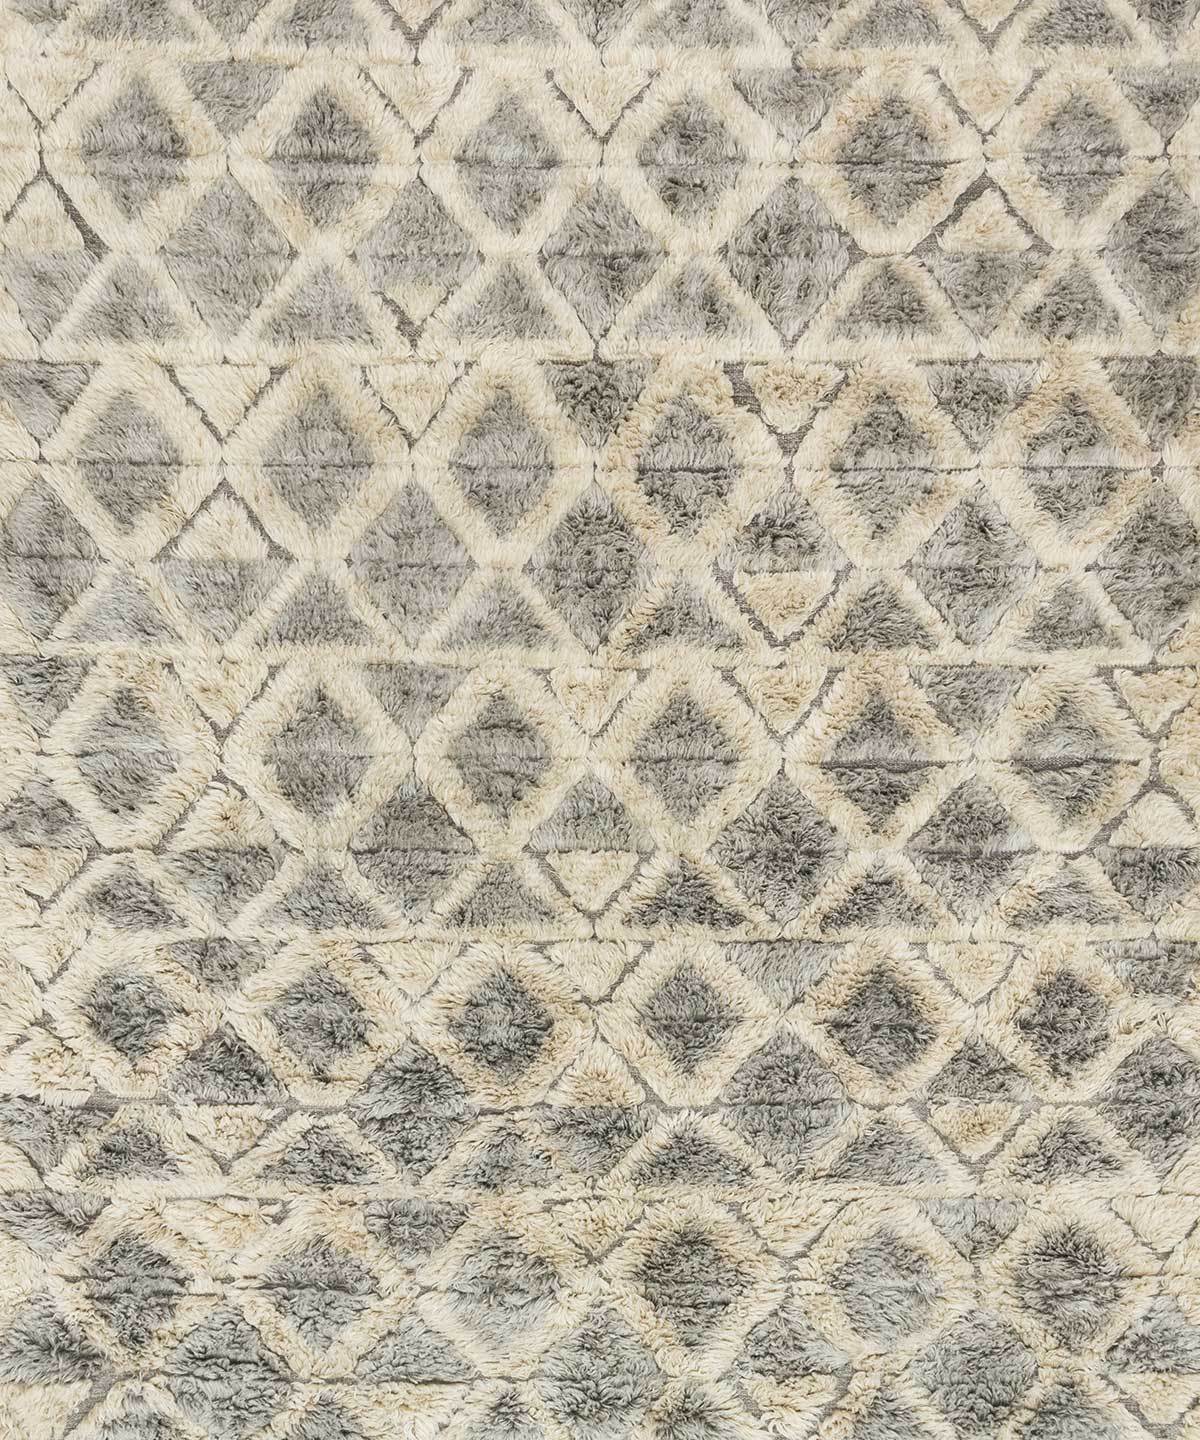 Hygge Rug in Smoke / Taupe by Loloi | TRNK